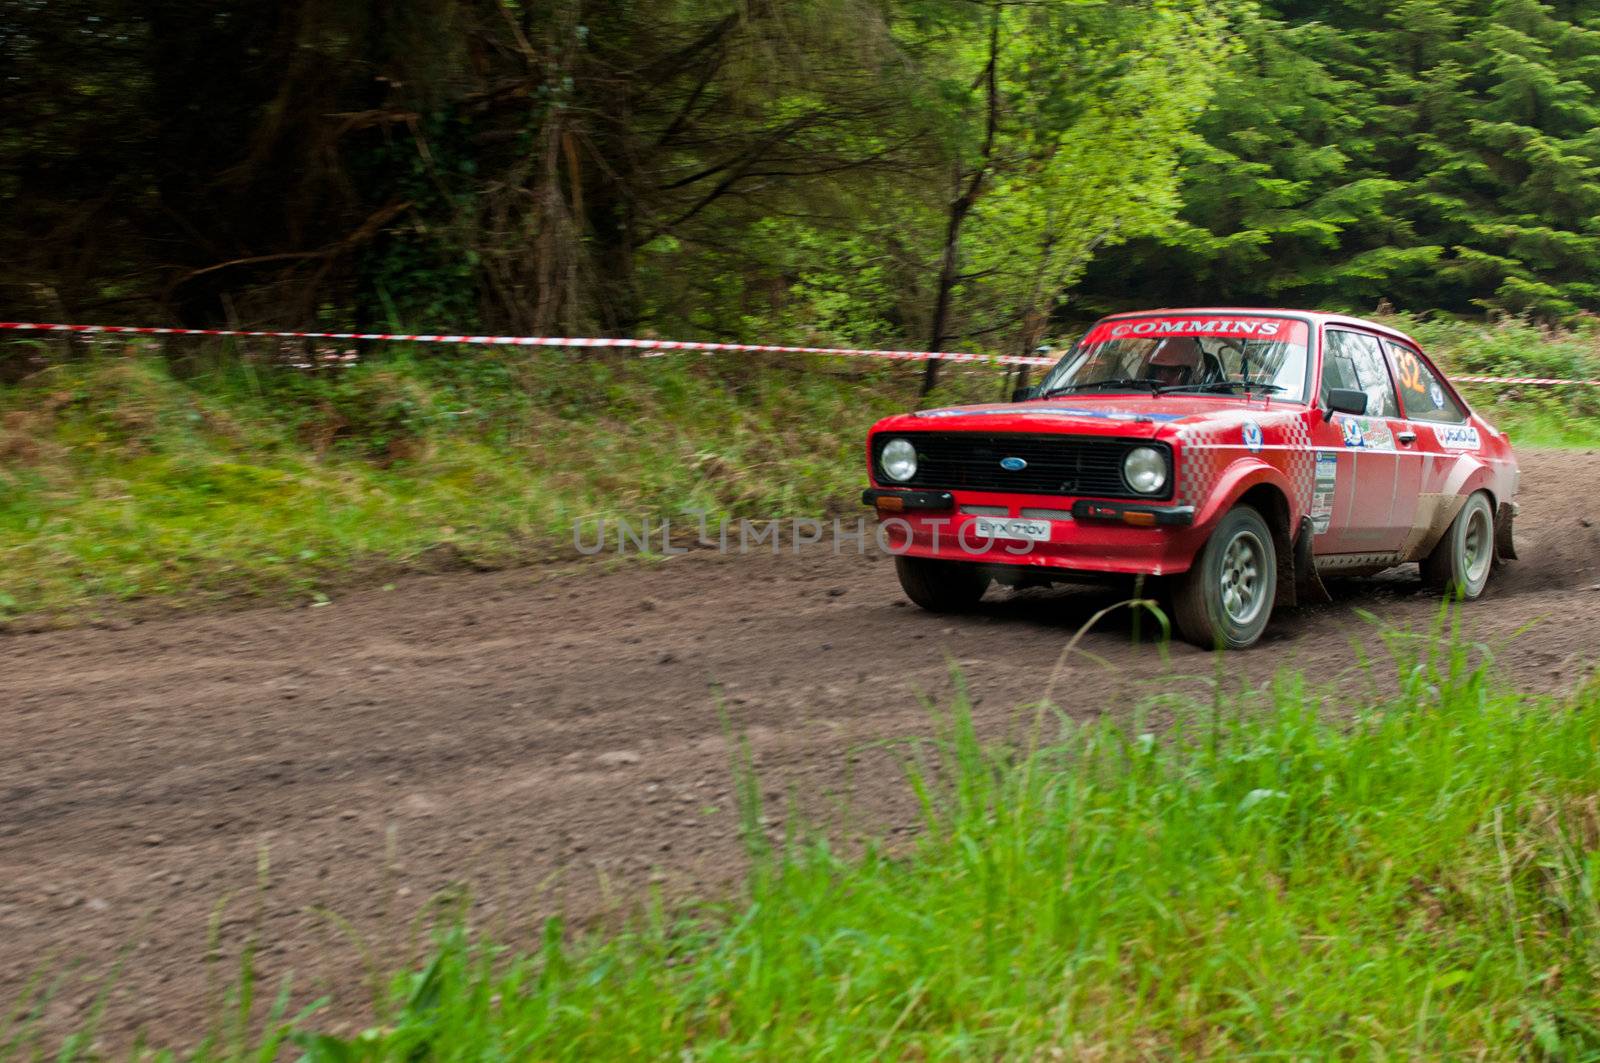 A. Commins driving Ford Escort by luissantos84